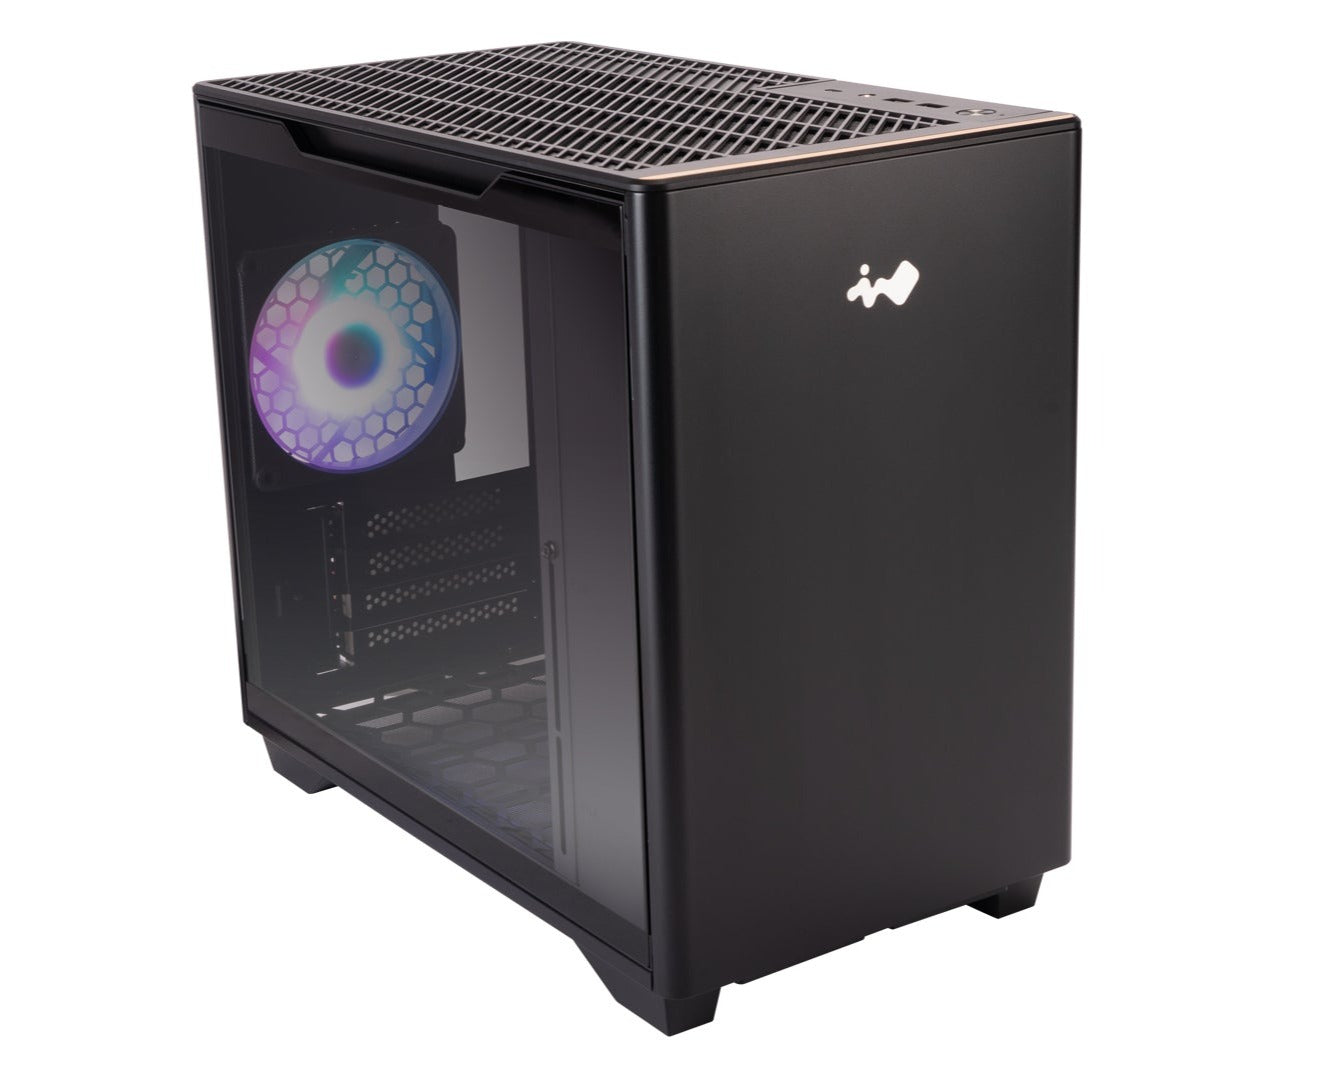 A3 (Micro ATX Chassis)